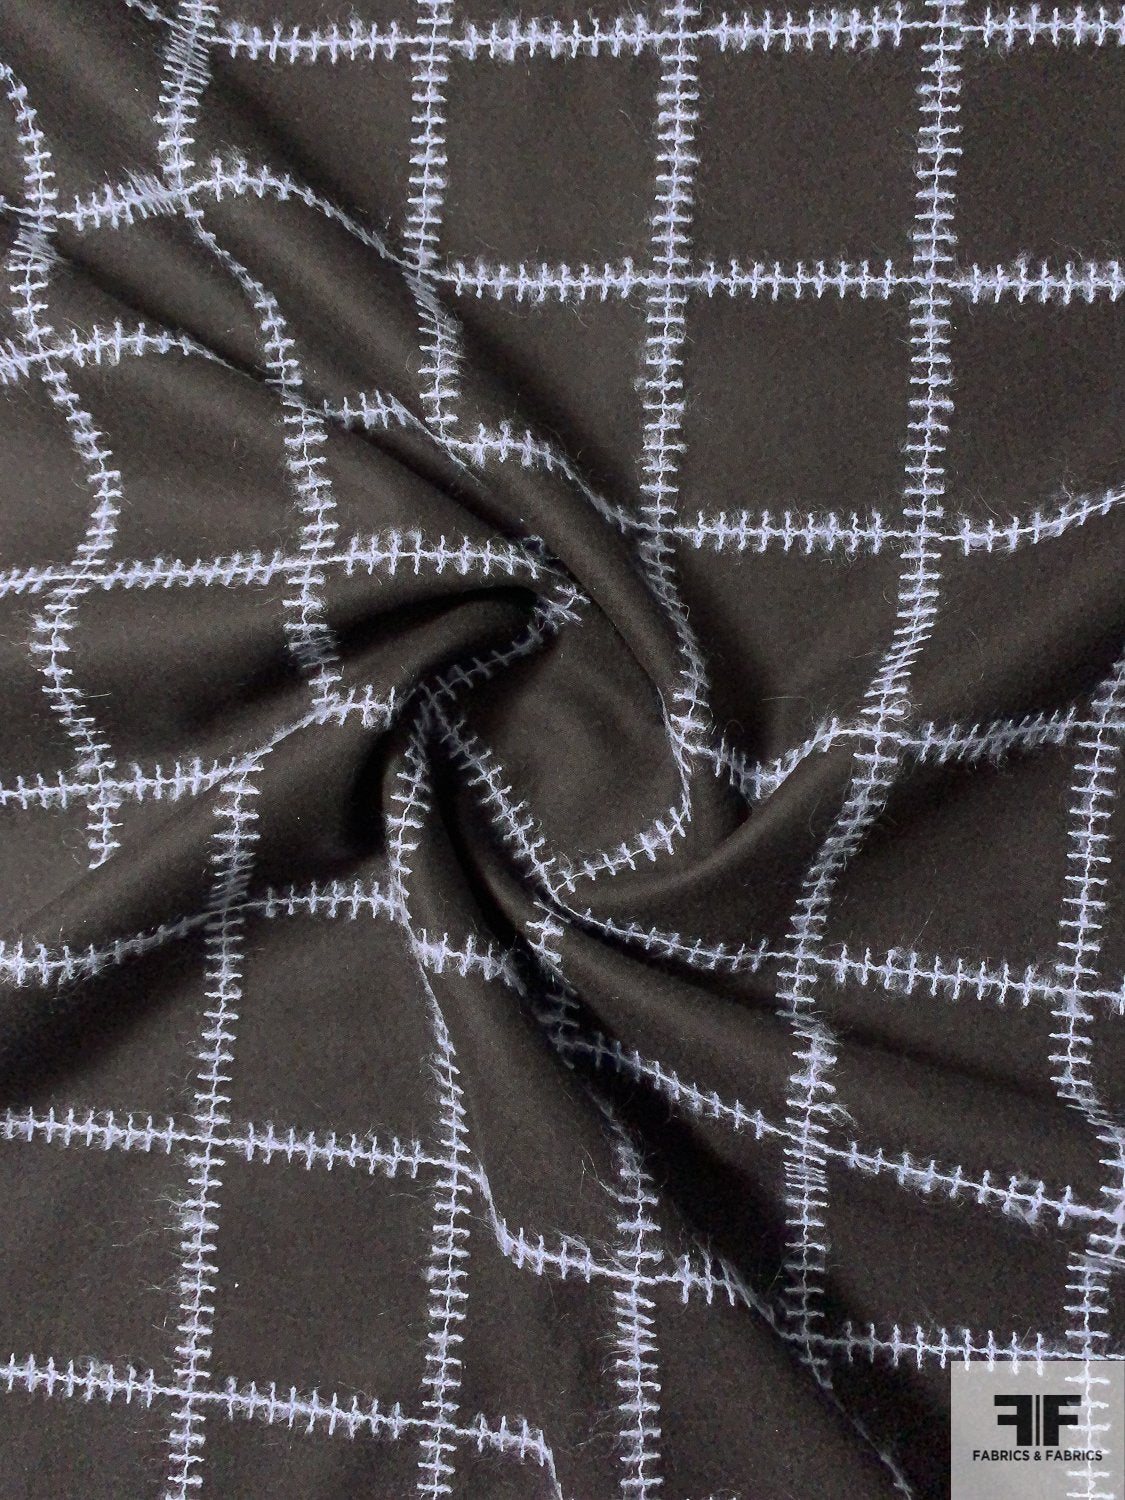 Italian Jacket Weight Wool with Stitching in Grid Pattern - Darkest Brown / Muted Lilac